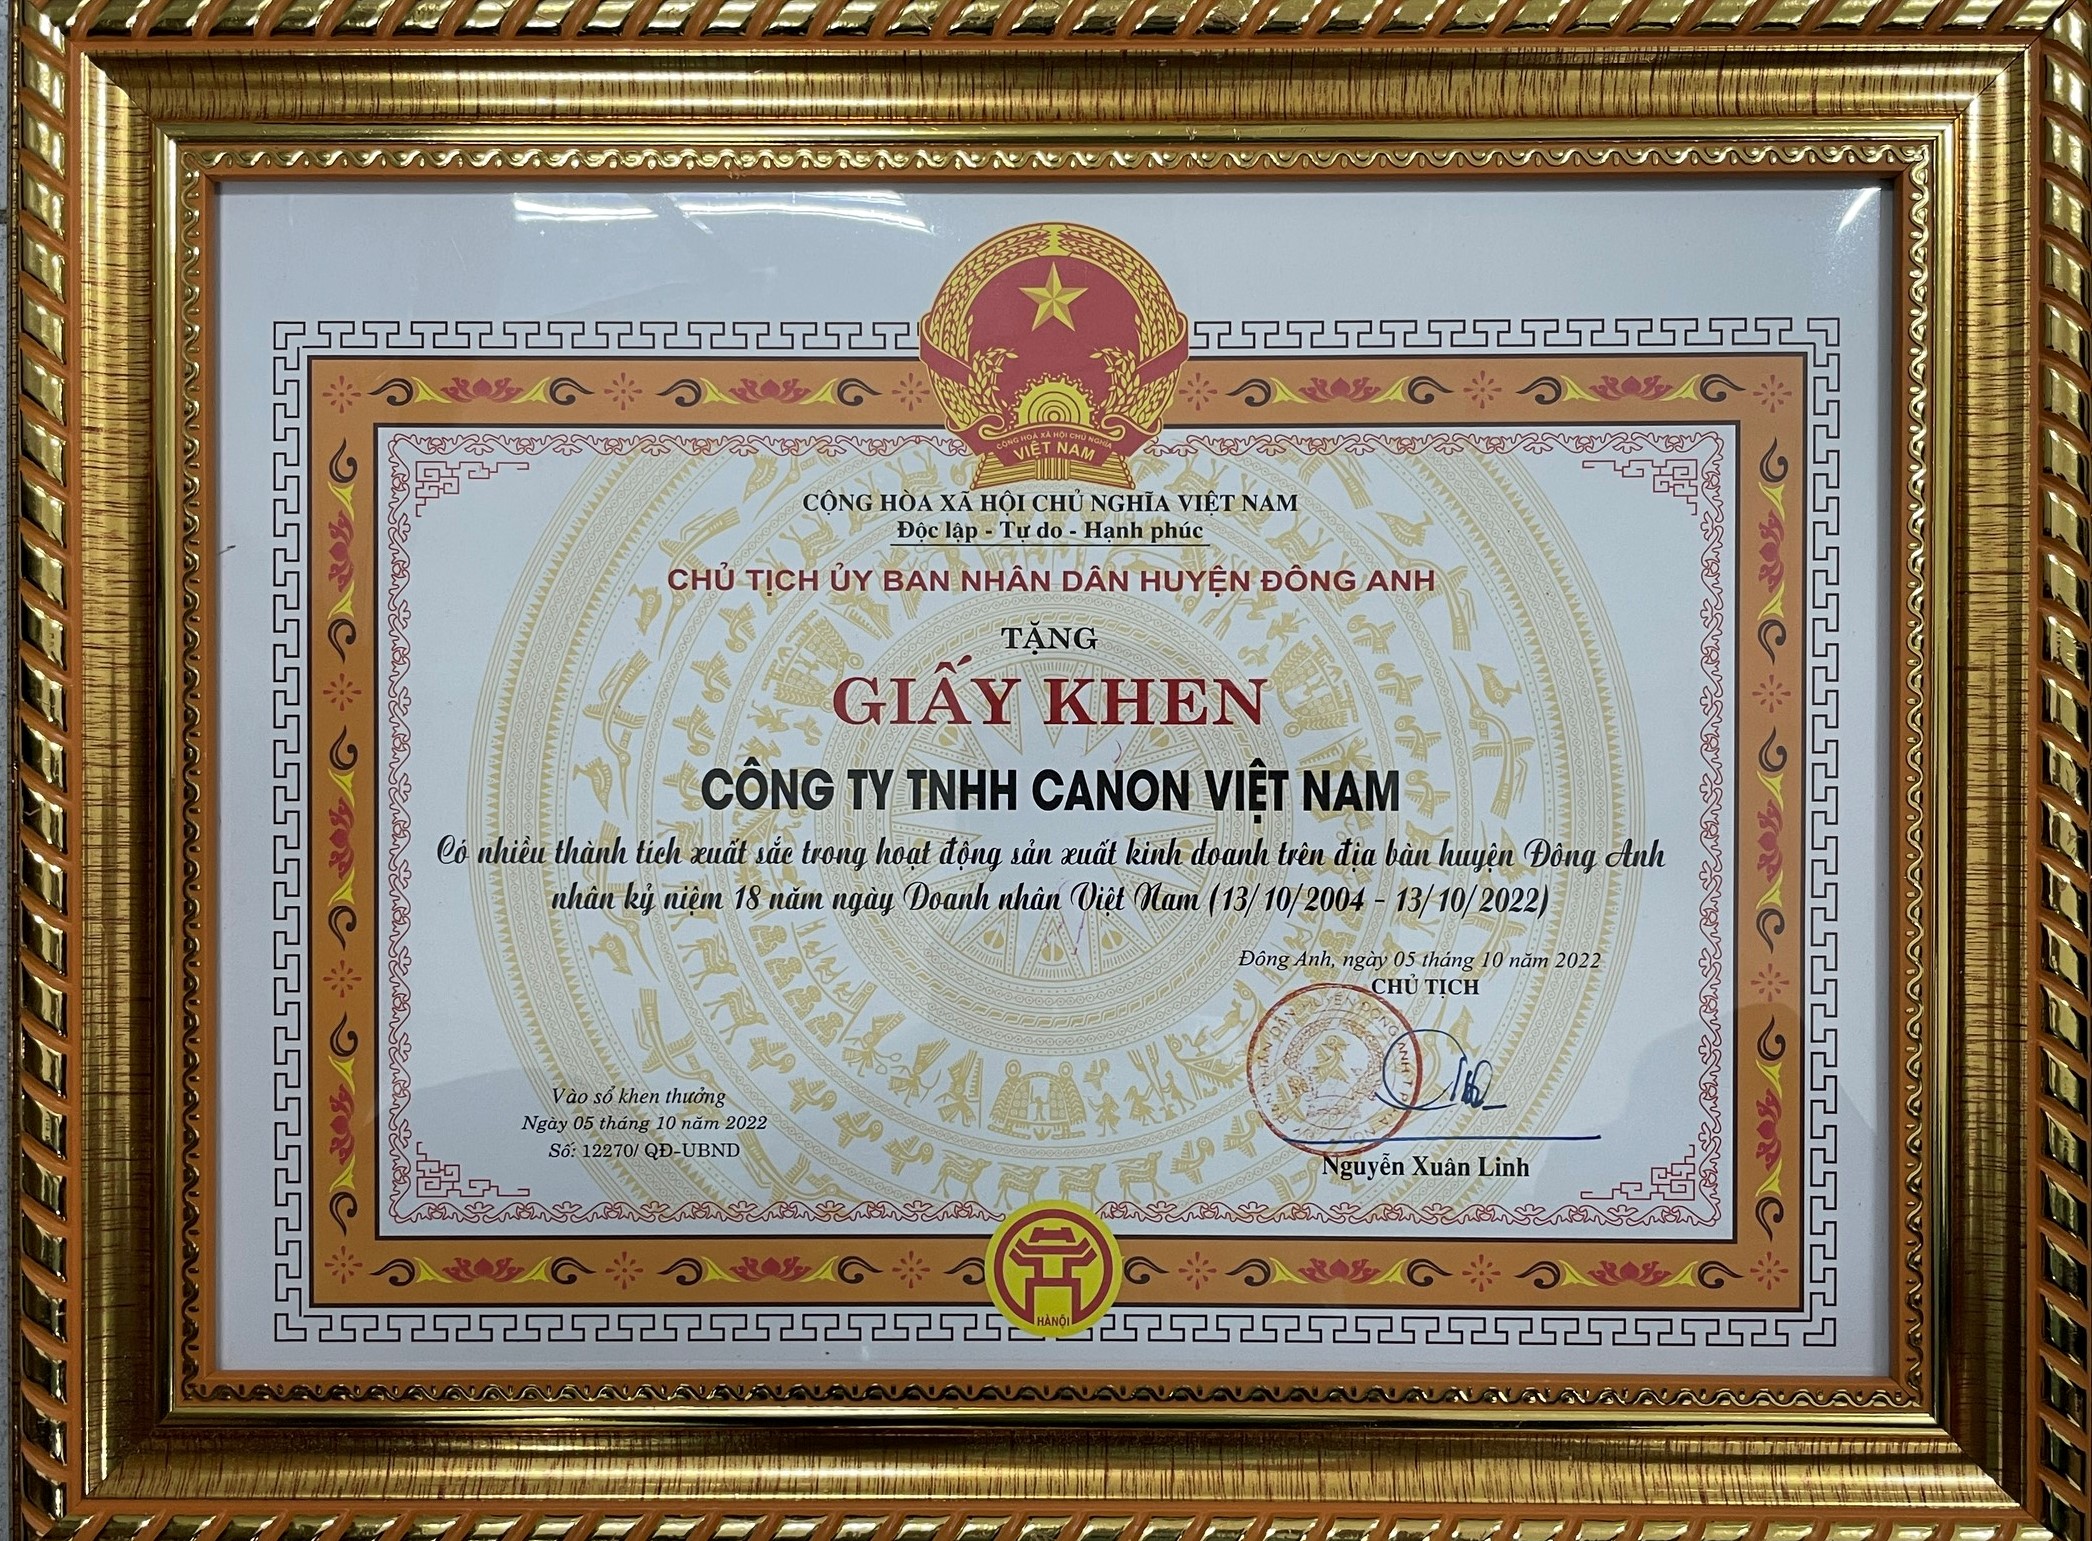 Receive the certificate from Chairman of Dong Anh District People’s Committee for Thang Long factory for excellent achievement in business activities in Dong Anh District